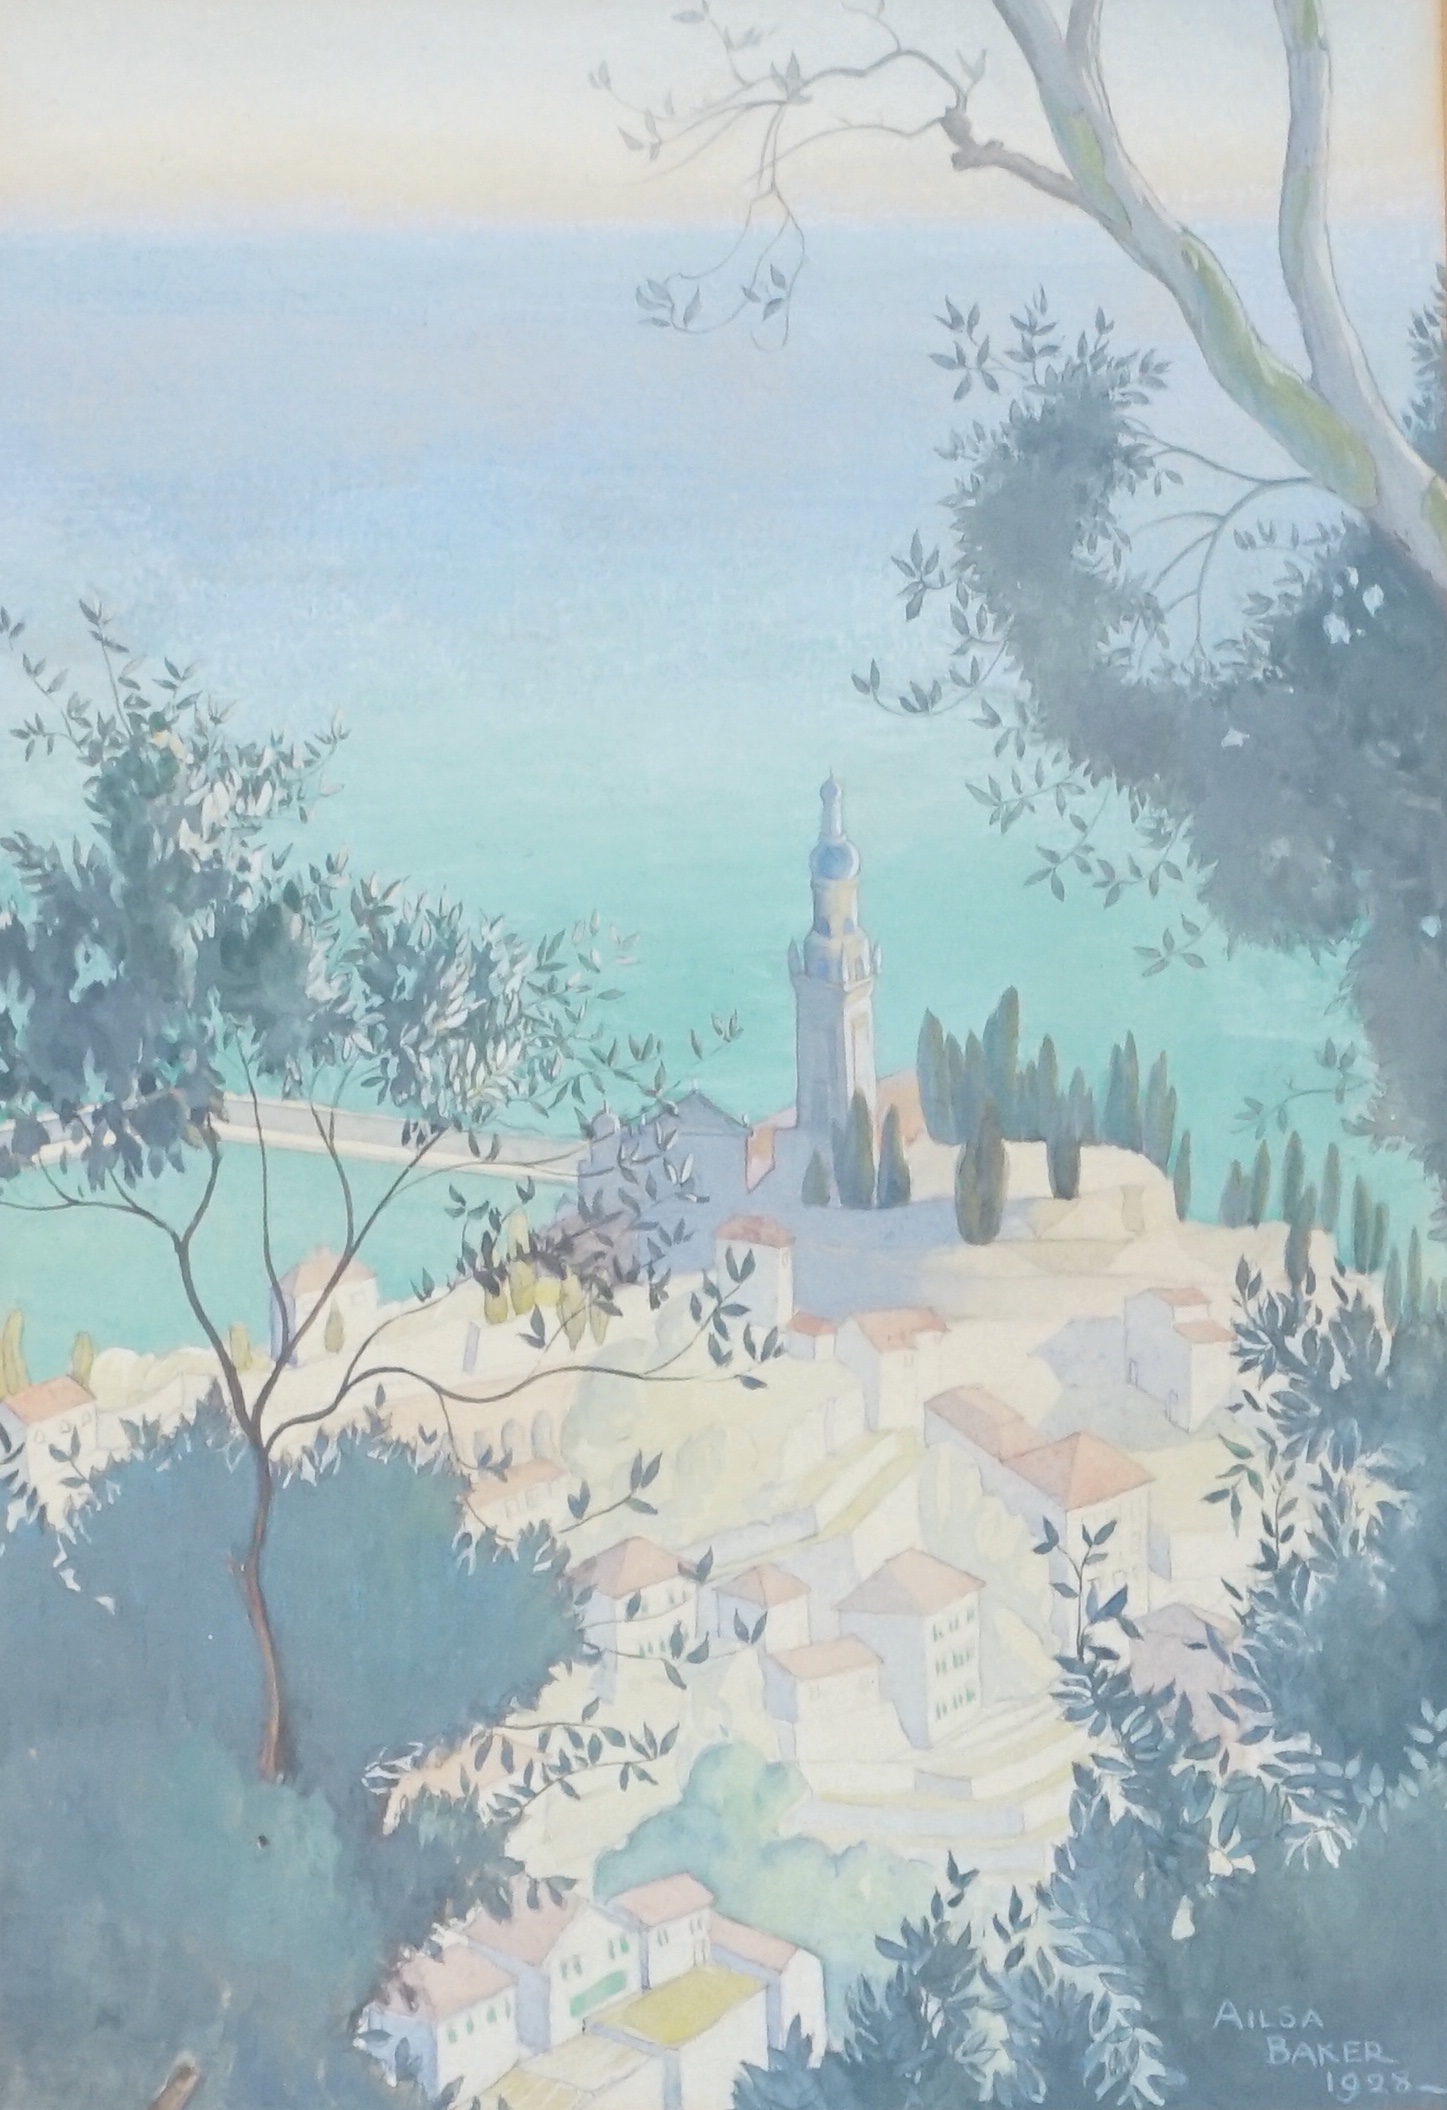 Ailsa Baker, gouache and watercolour, Mediterranean coastal town with church spire, signed and dated 1928, 26 x 18cm